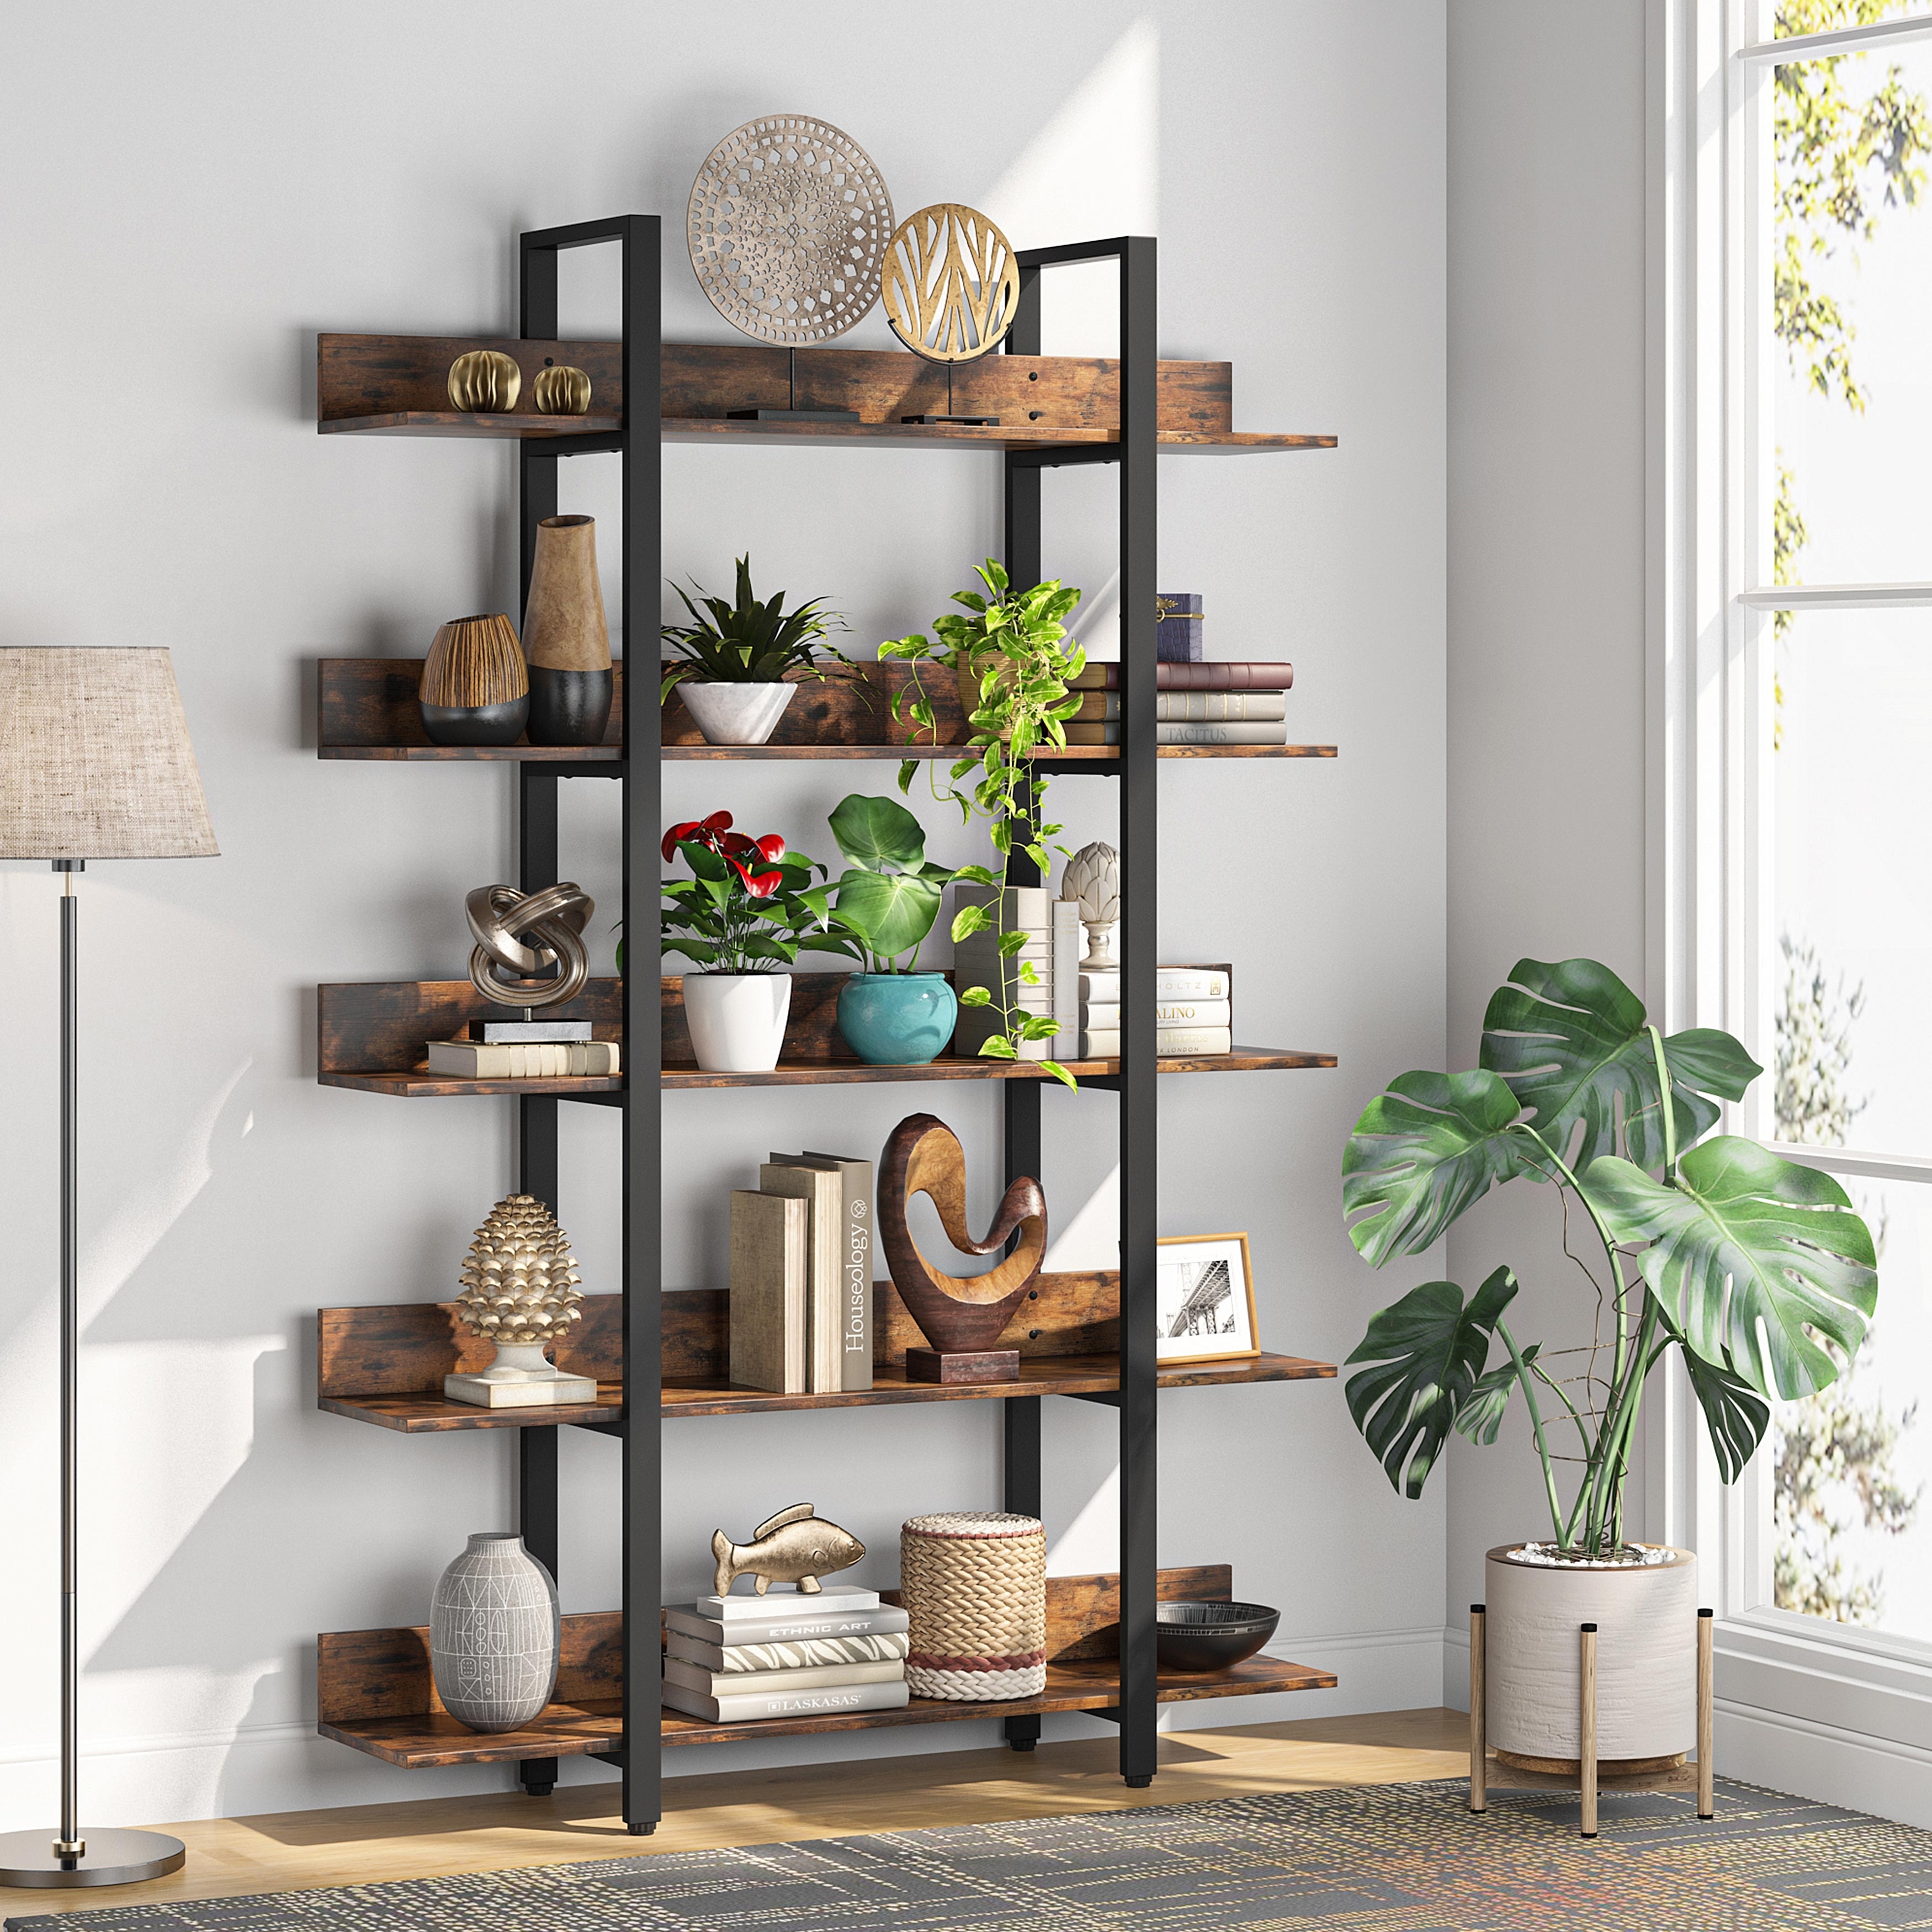 https://ak1.ostkcdn.com/images/products/is/images/direct/1bc31497a2cc156f5648fa9ae9e05977f0e9095a/47%27%27-Bookcase%2C-Industrial-Etagere-Bookshelves-Storage%2C-Open-Display-Shelves.jpg